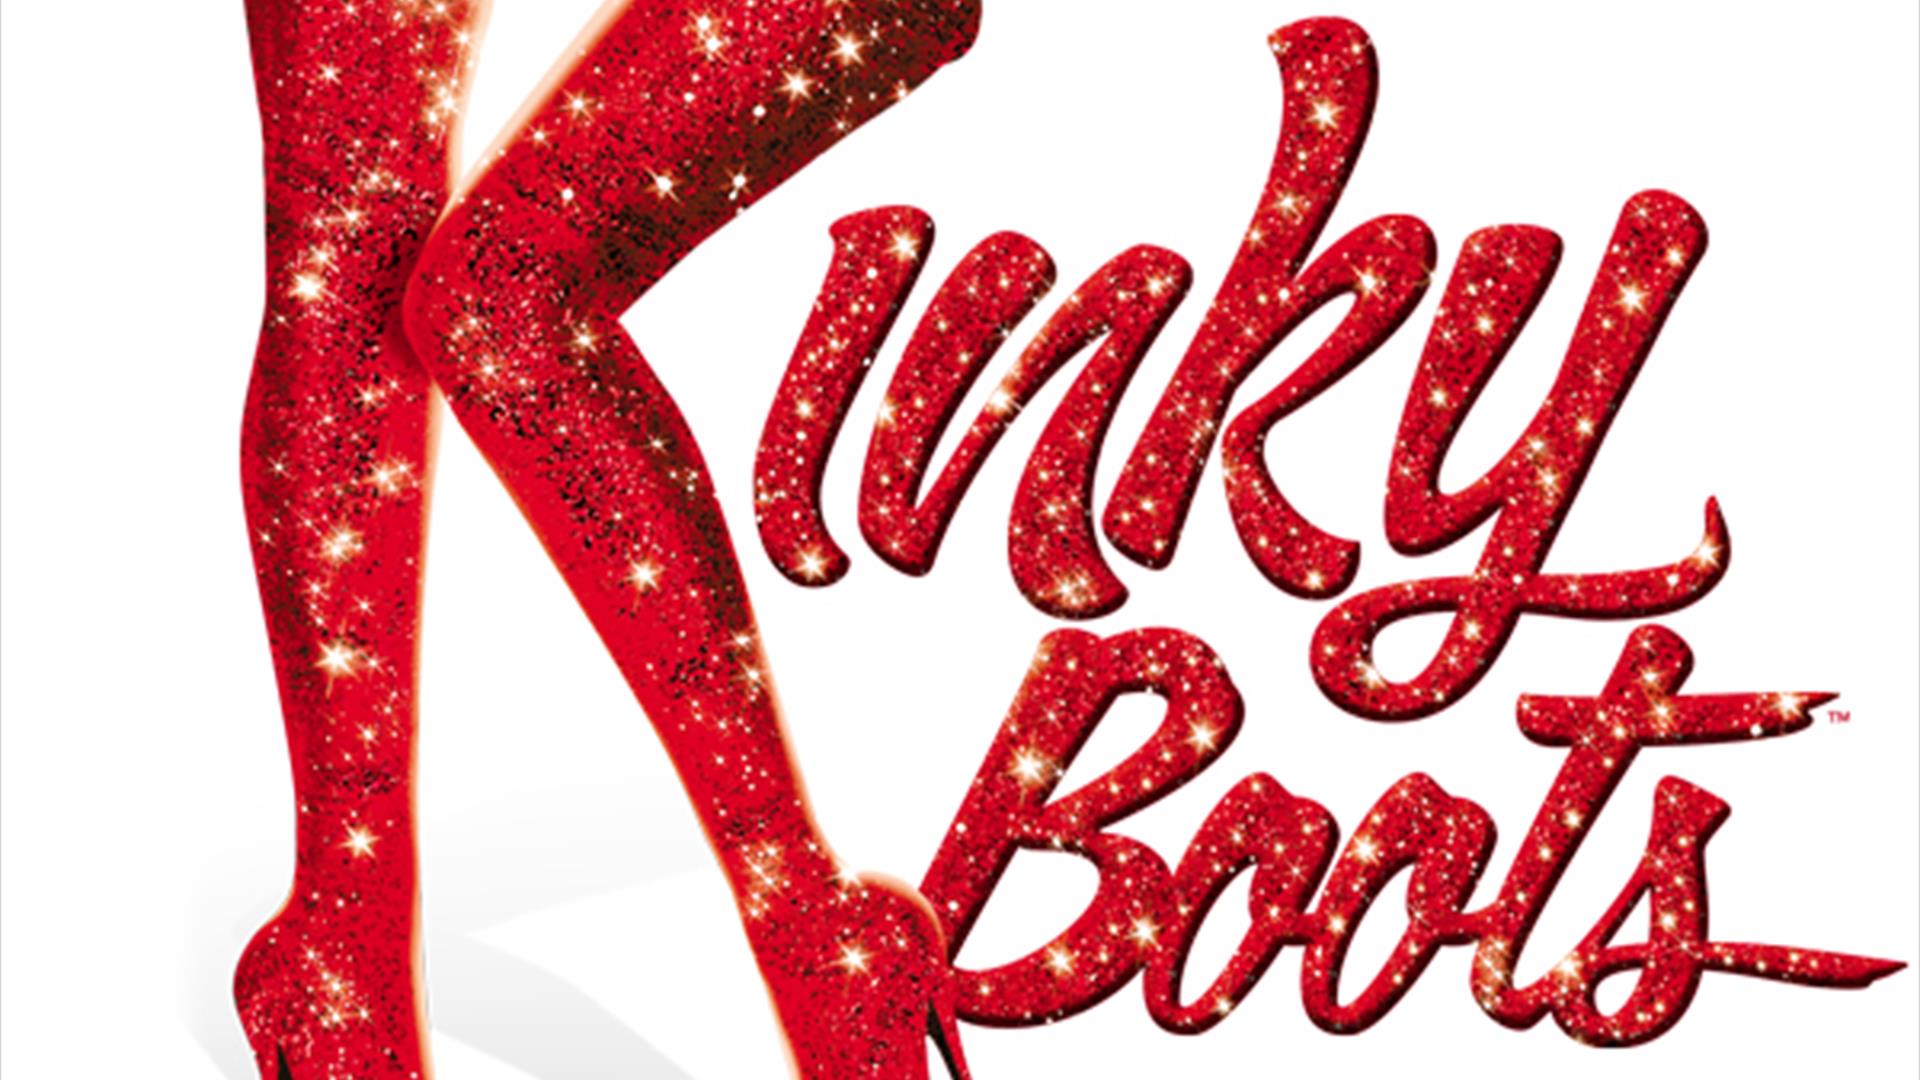 Image shows the words 'Kinky Boots' in red glitter. The letter 'K' is shown as a pair of legs wearing high heel shoes